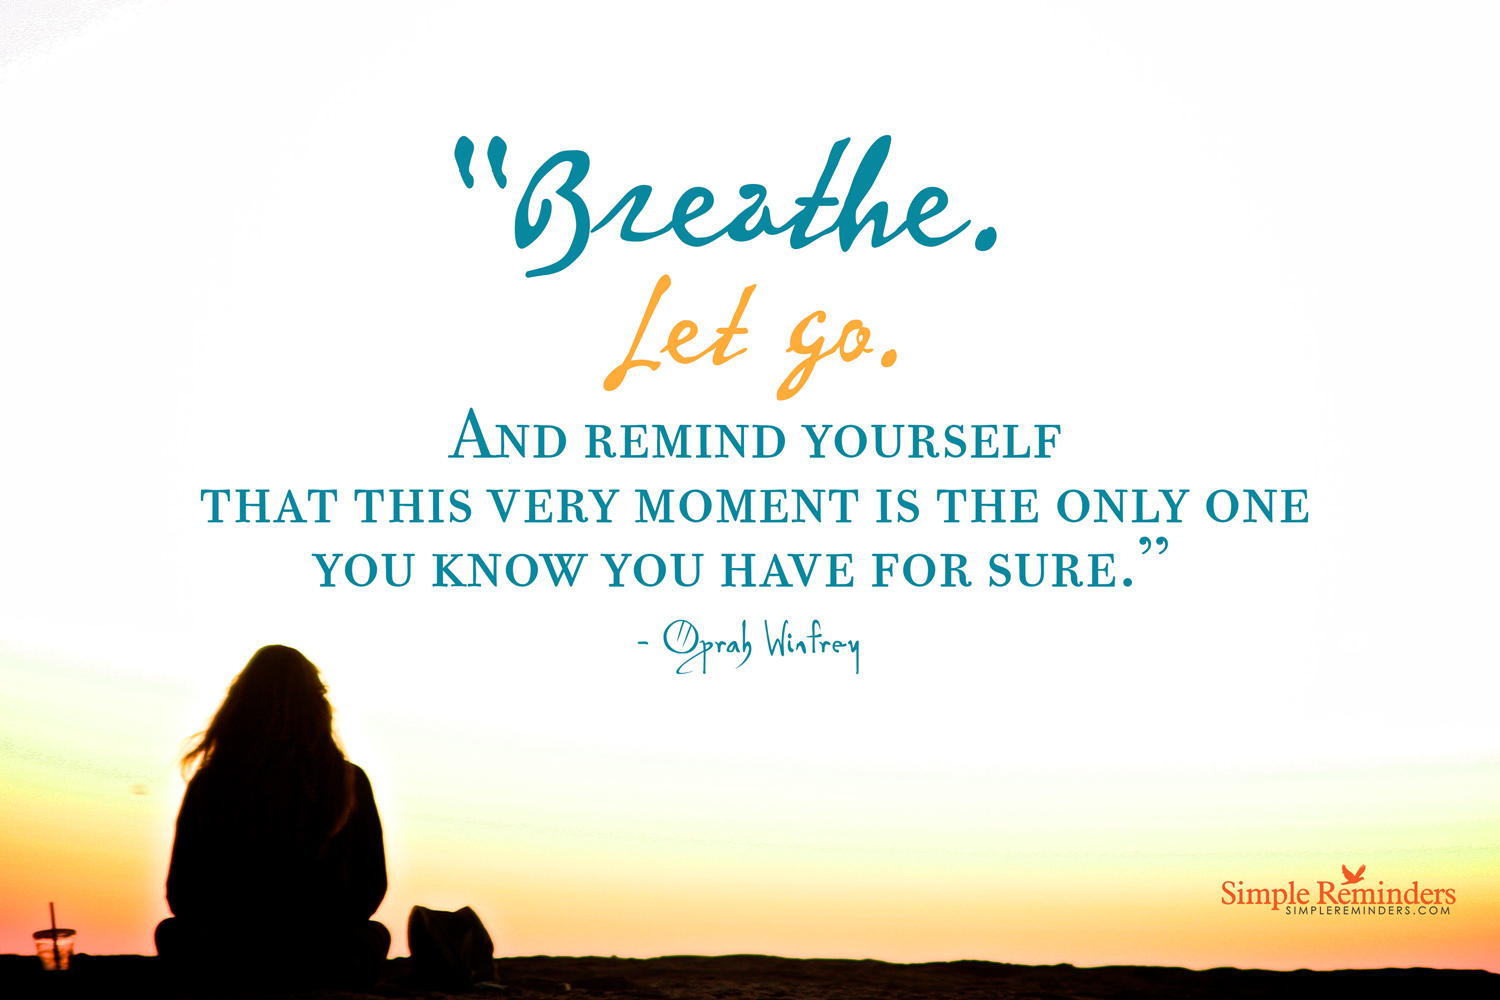 Breath and Let Go